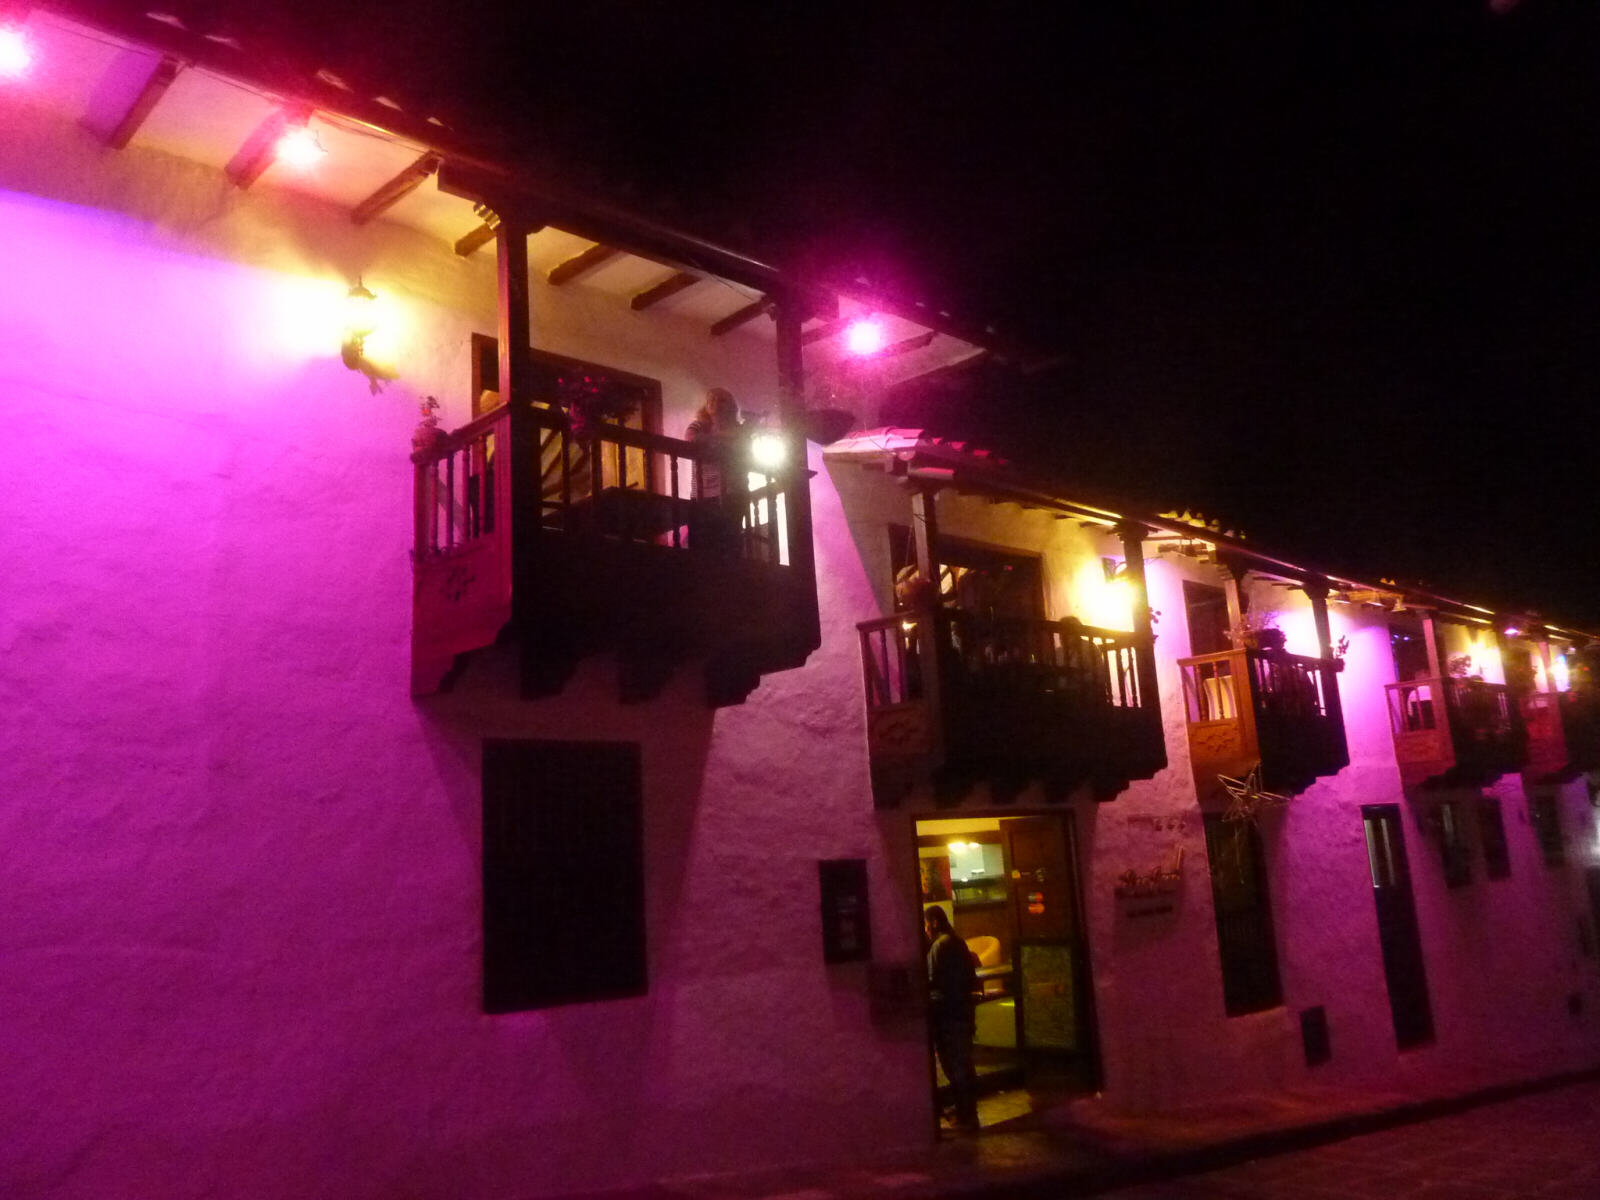 The colourful Don Juan restaurant in Barichara, Colombia